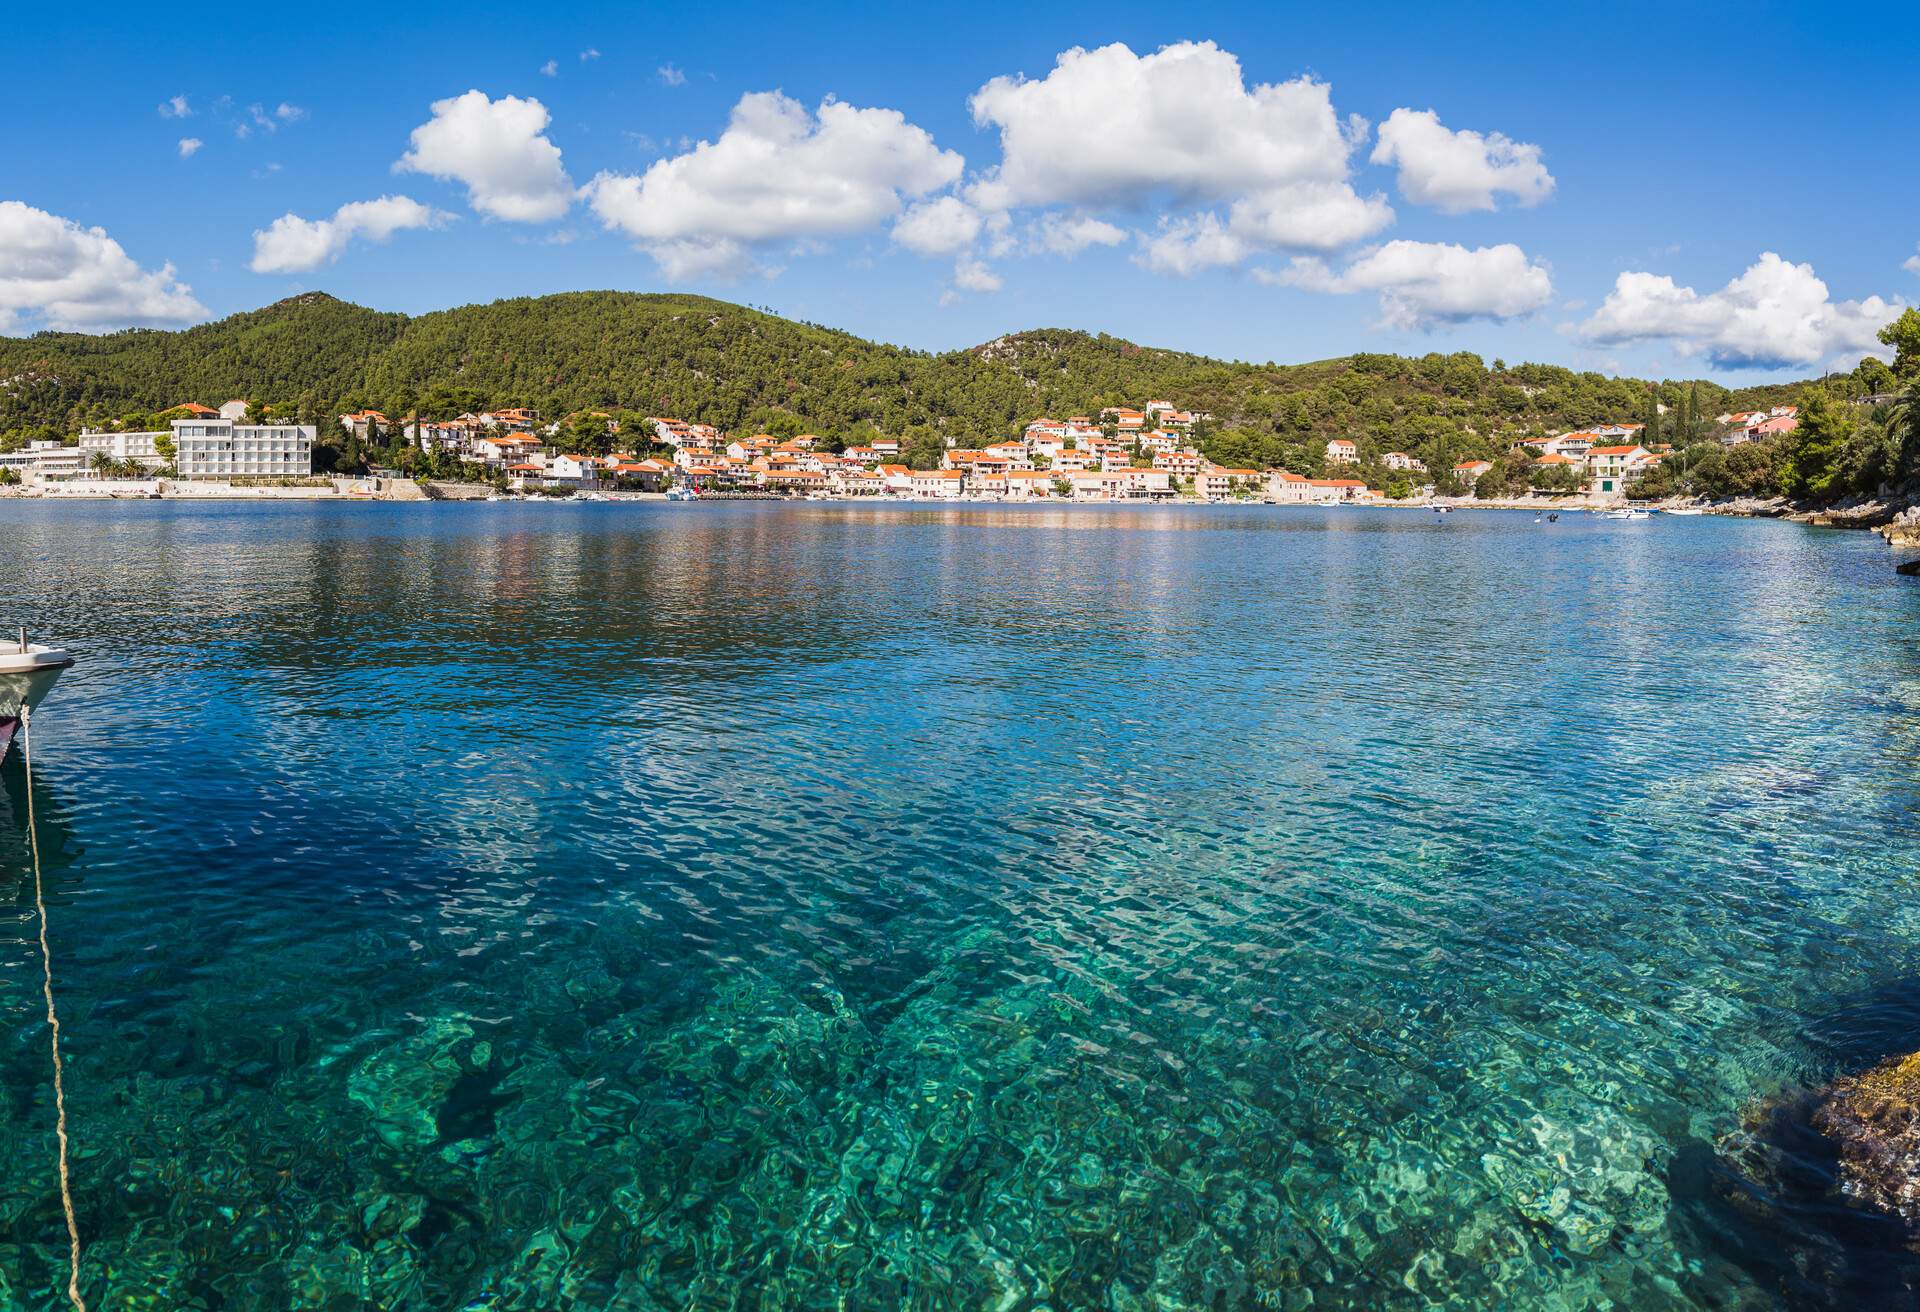 A multiple image panorama looking across the aqua coloured waters of Brna Bay in Smokvica region of Korcula Island located on the southern slopes.